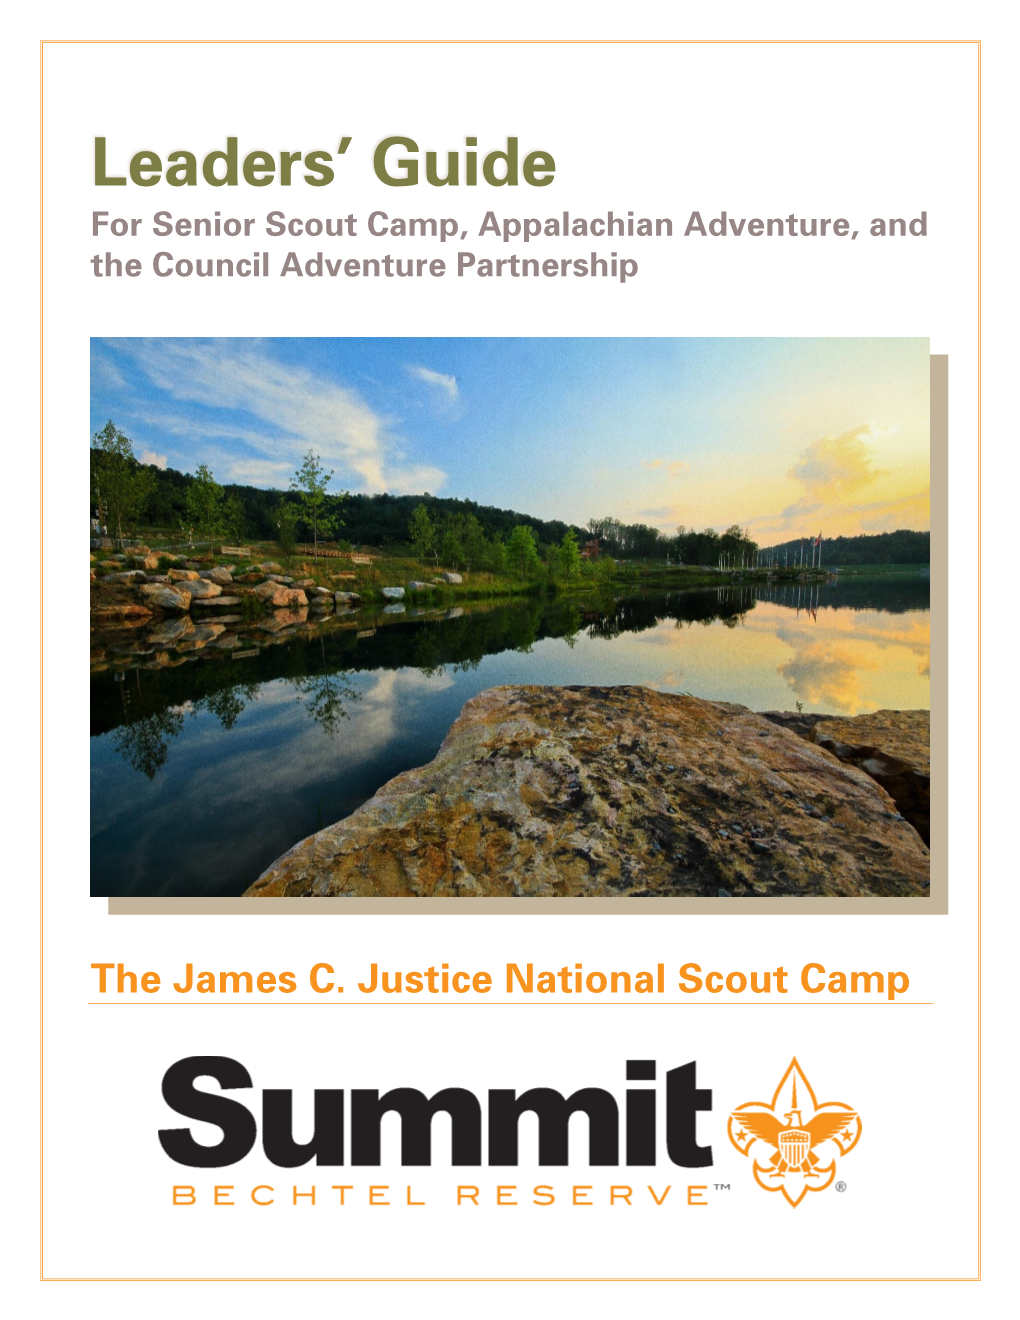 James C. Justice National Scout Camp